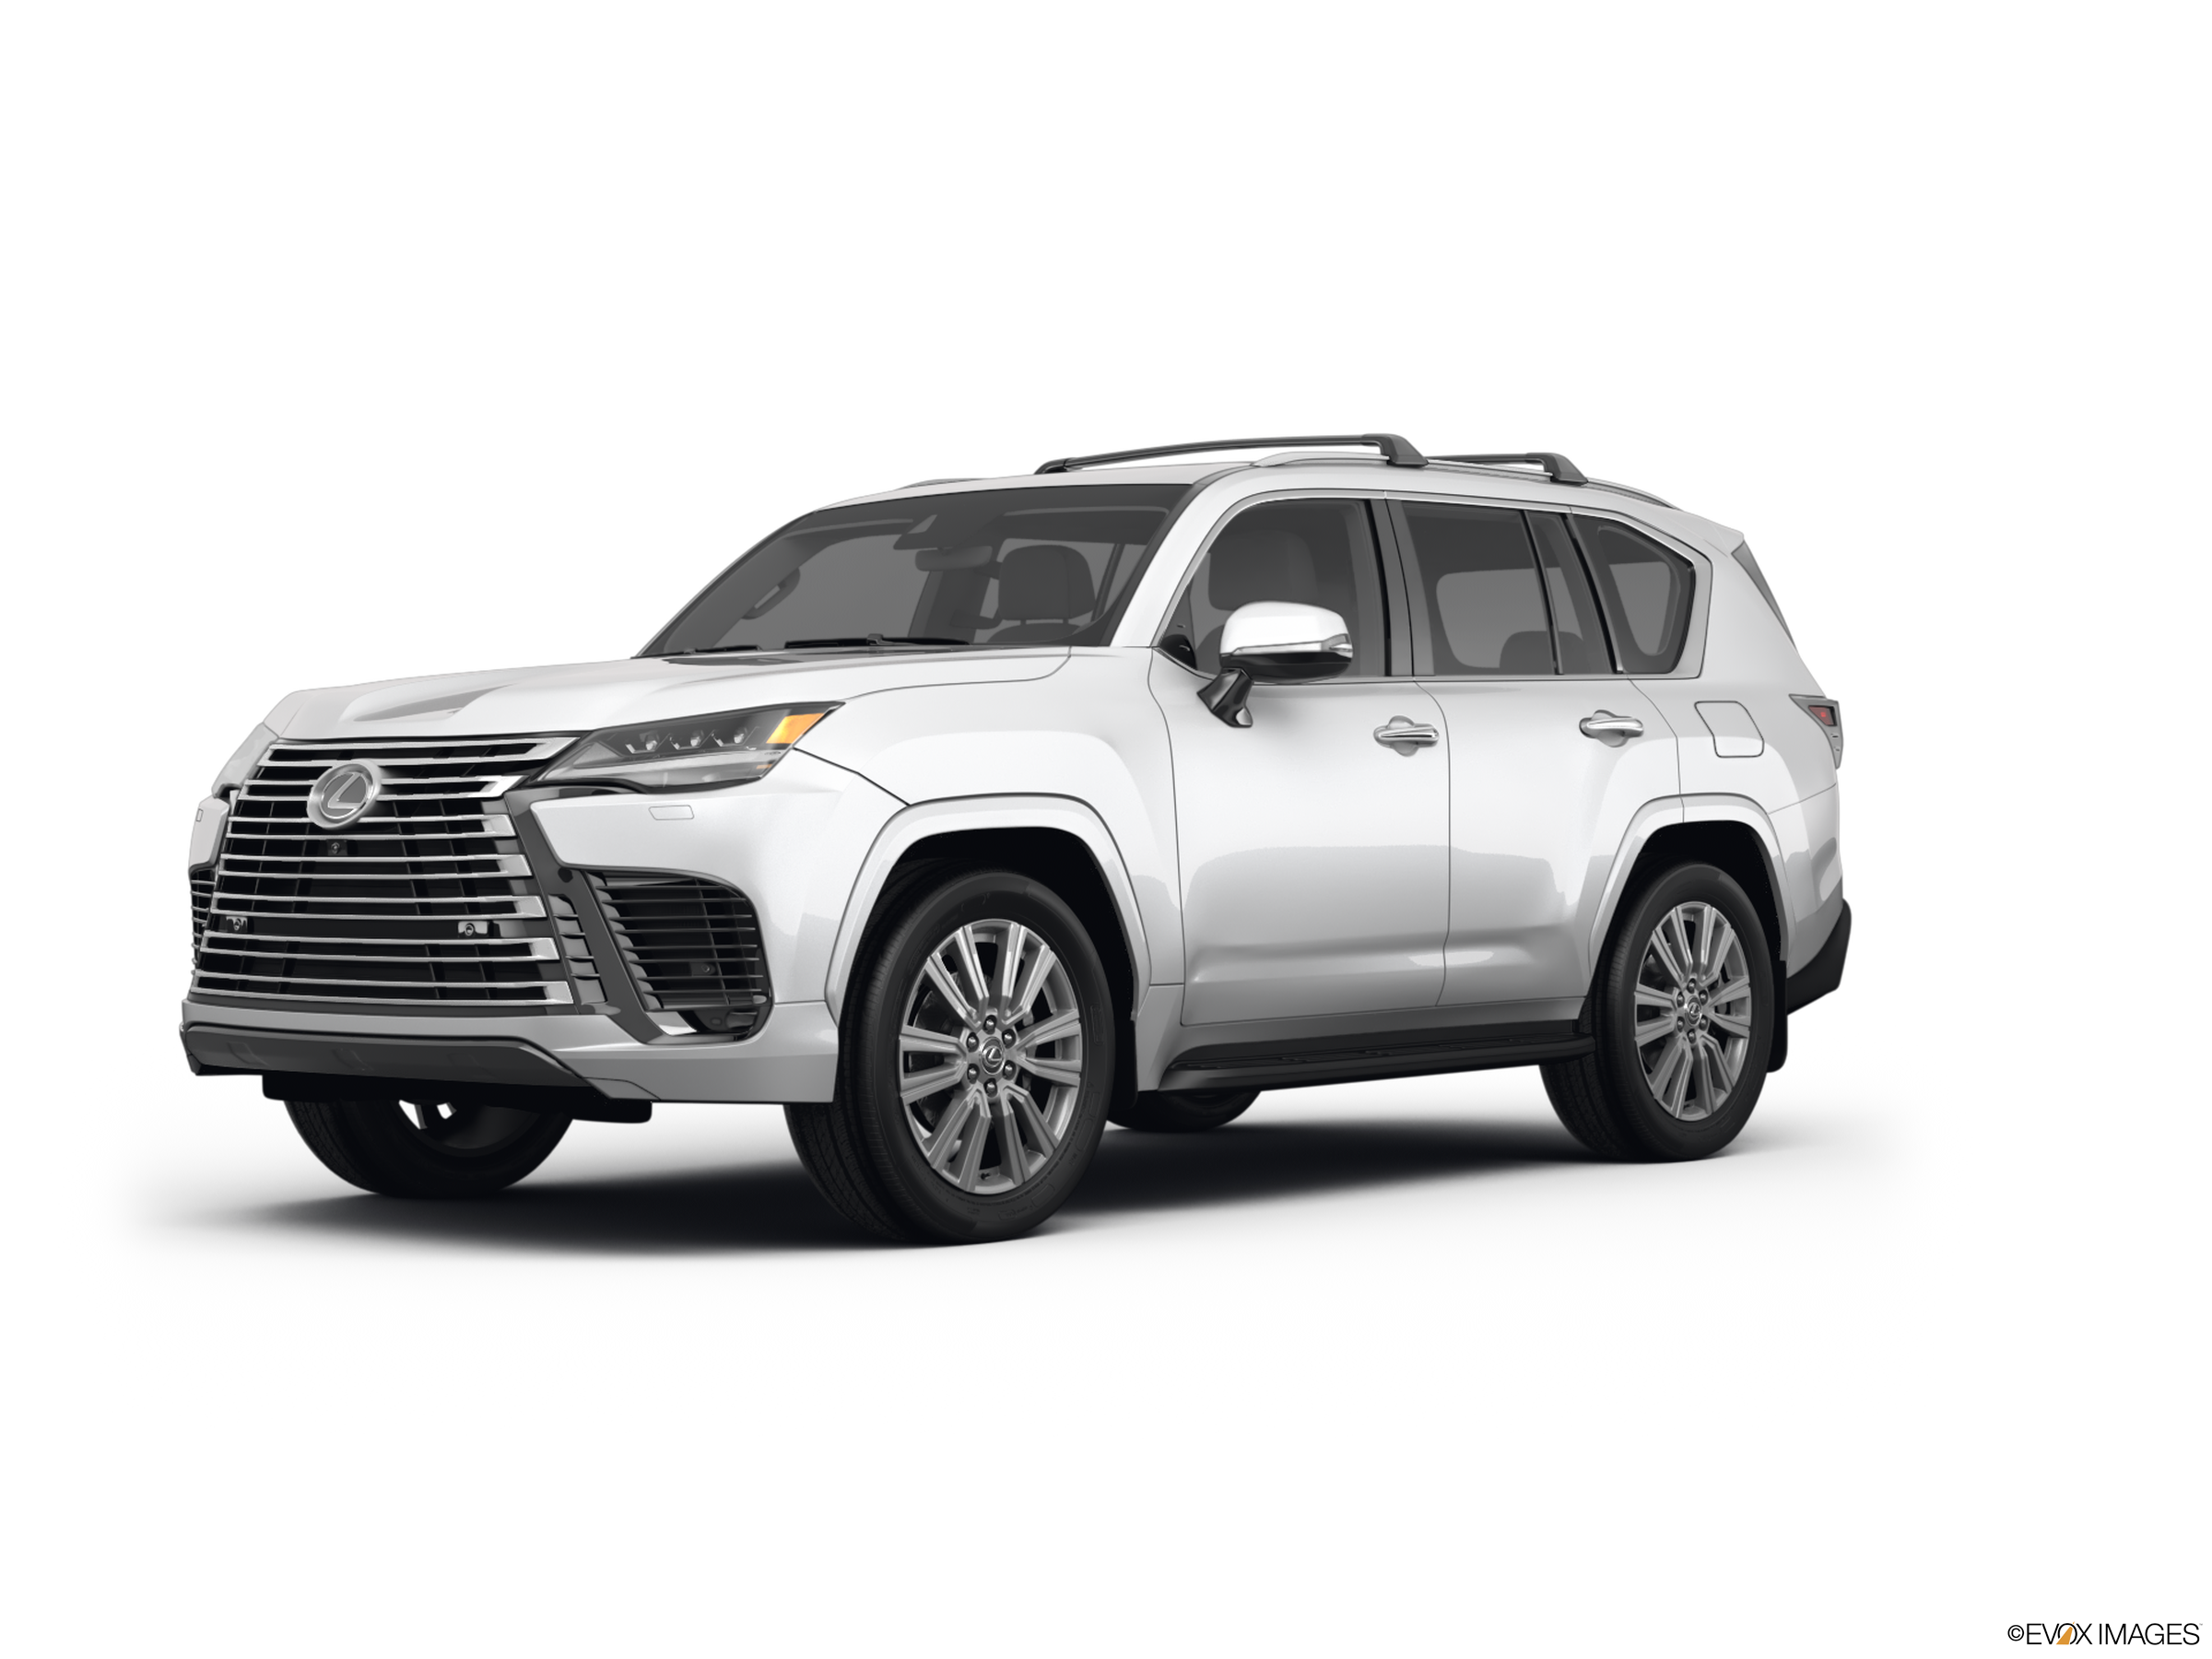 2023 Lexus LX Reviews, Ratings, Prices - Consumer Reports